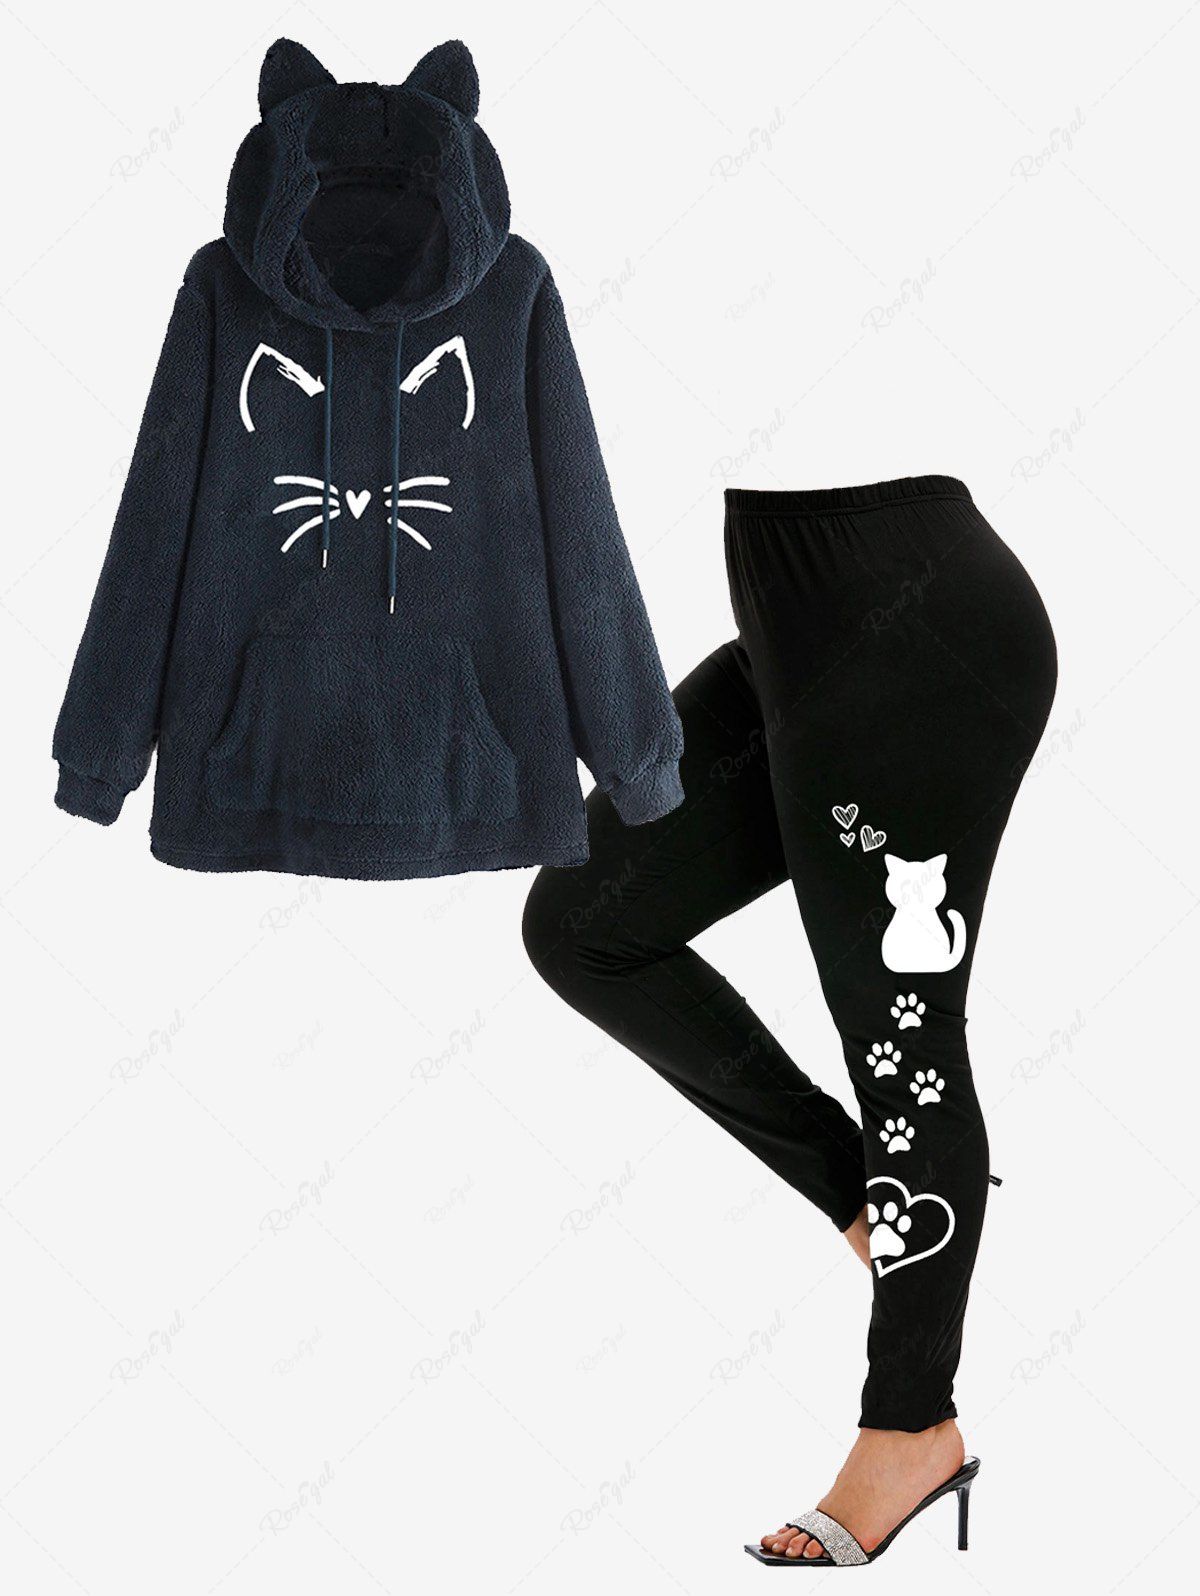 Chic Cat Graphic Fluffy Hoodie and High Waist Cat Paw Print Leggings Plus Size Outerwear Outfit  